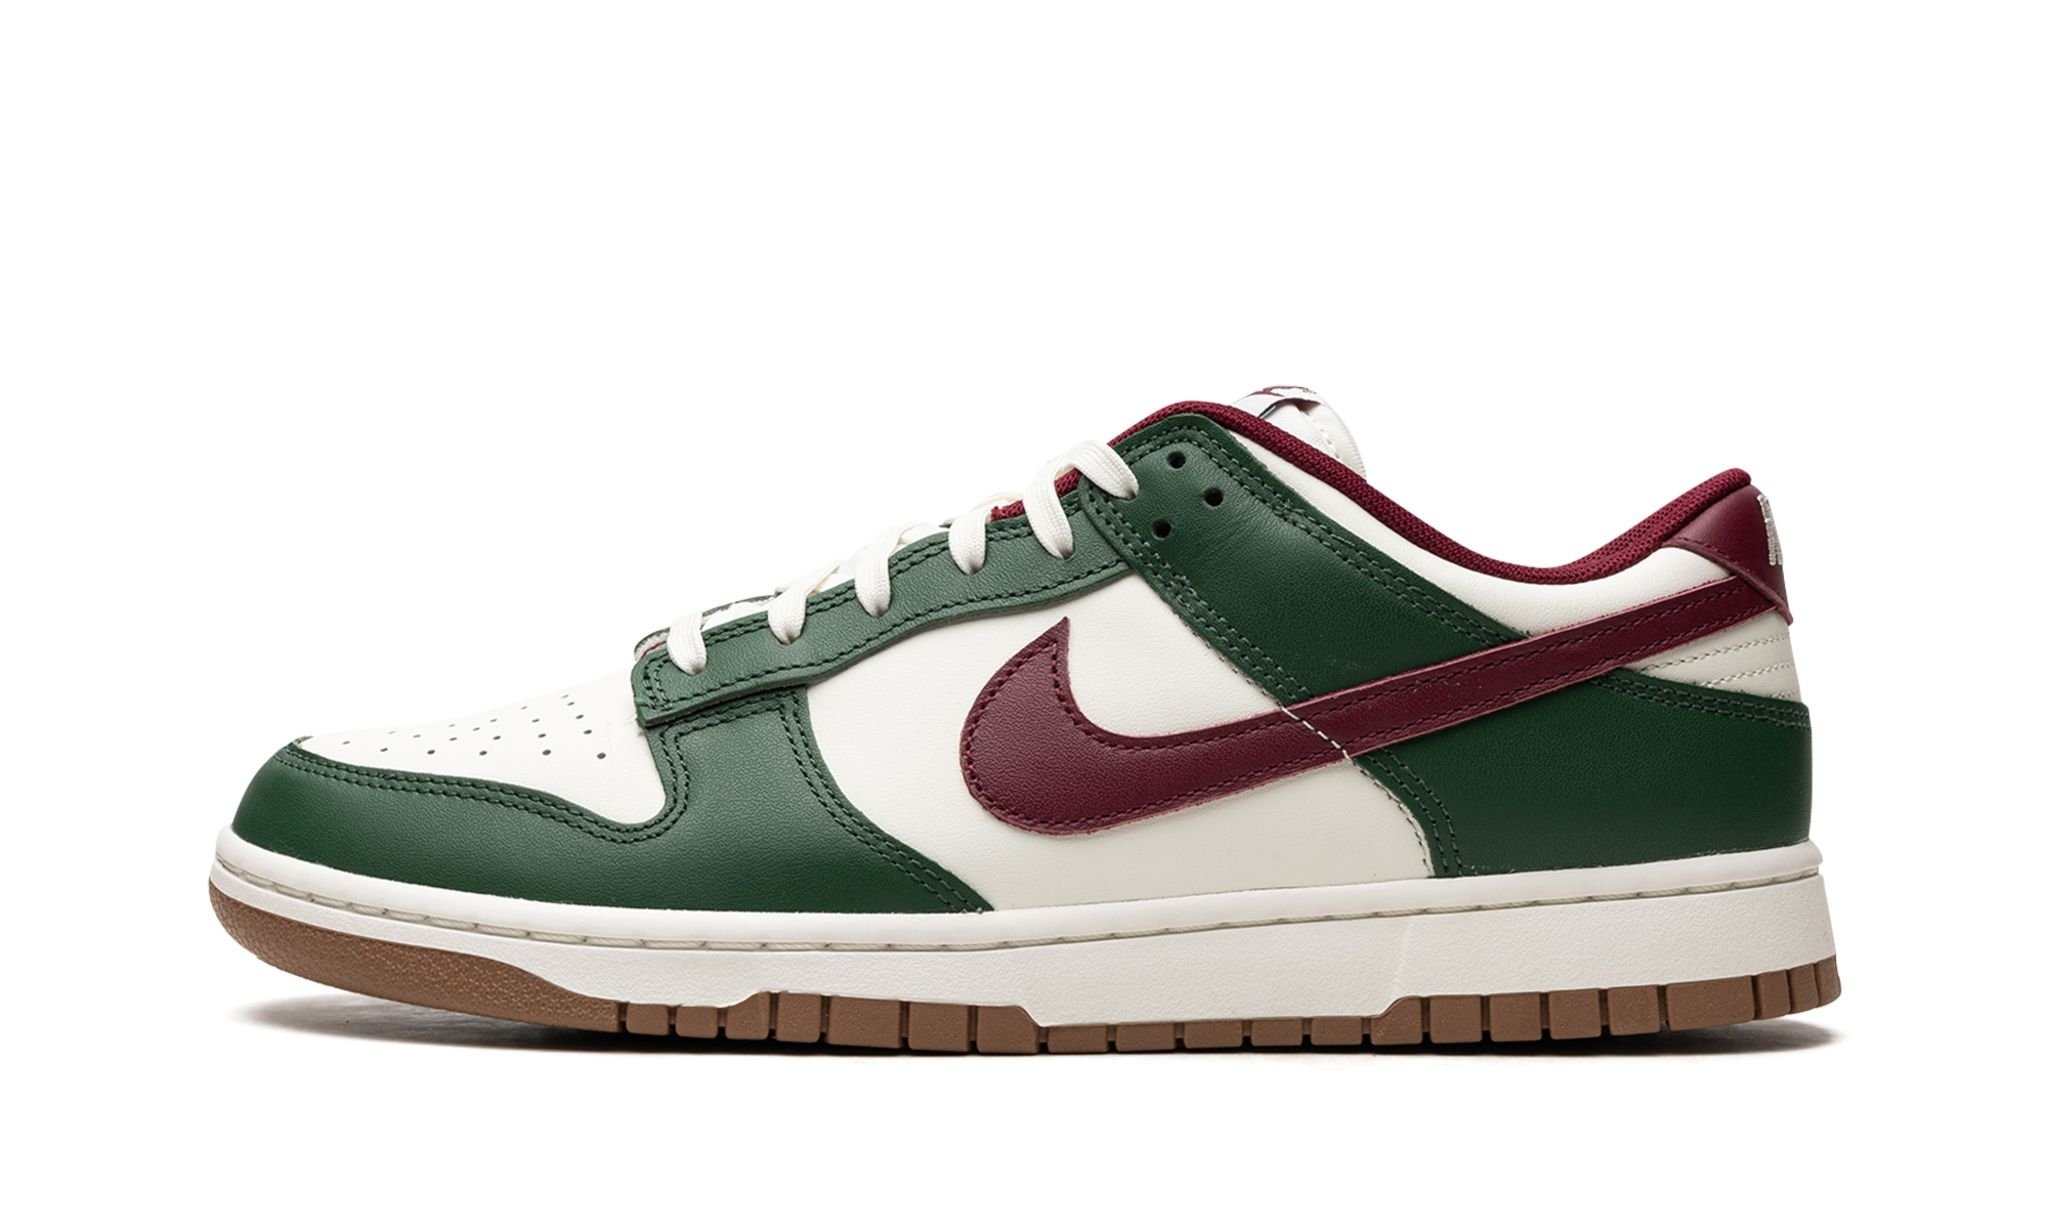 Dunk Low Retro "Gorge Green / Team Red" - 1